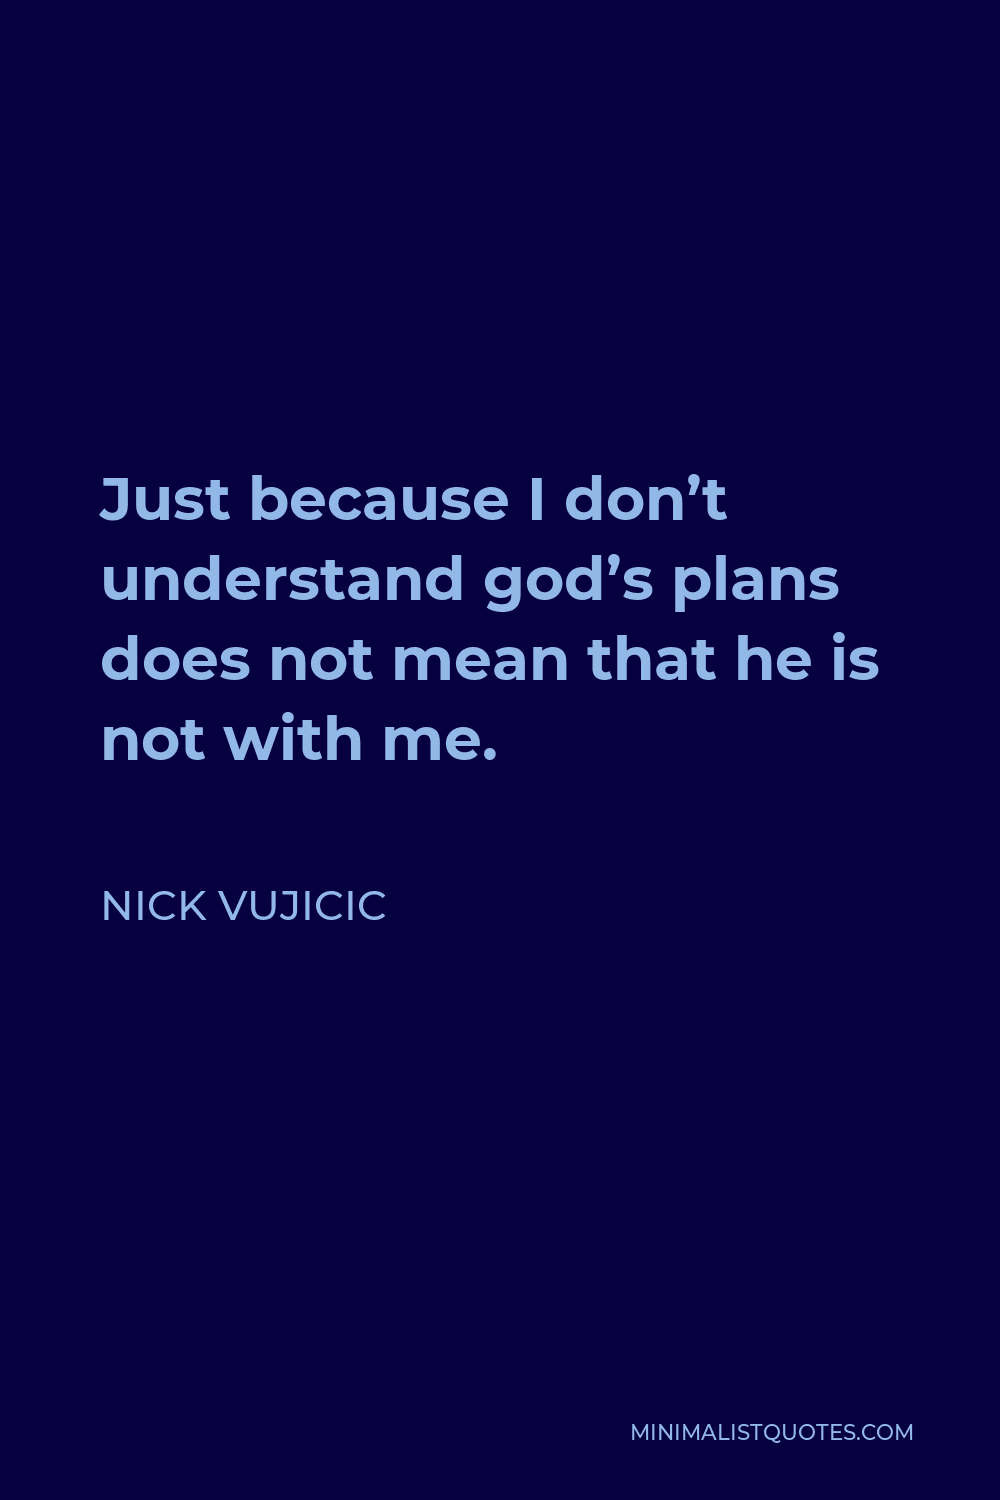 Nick Vujicic Quote - Just because I don’t understand god’s plans does not mean that he is not with me.